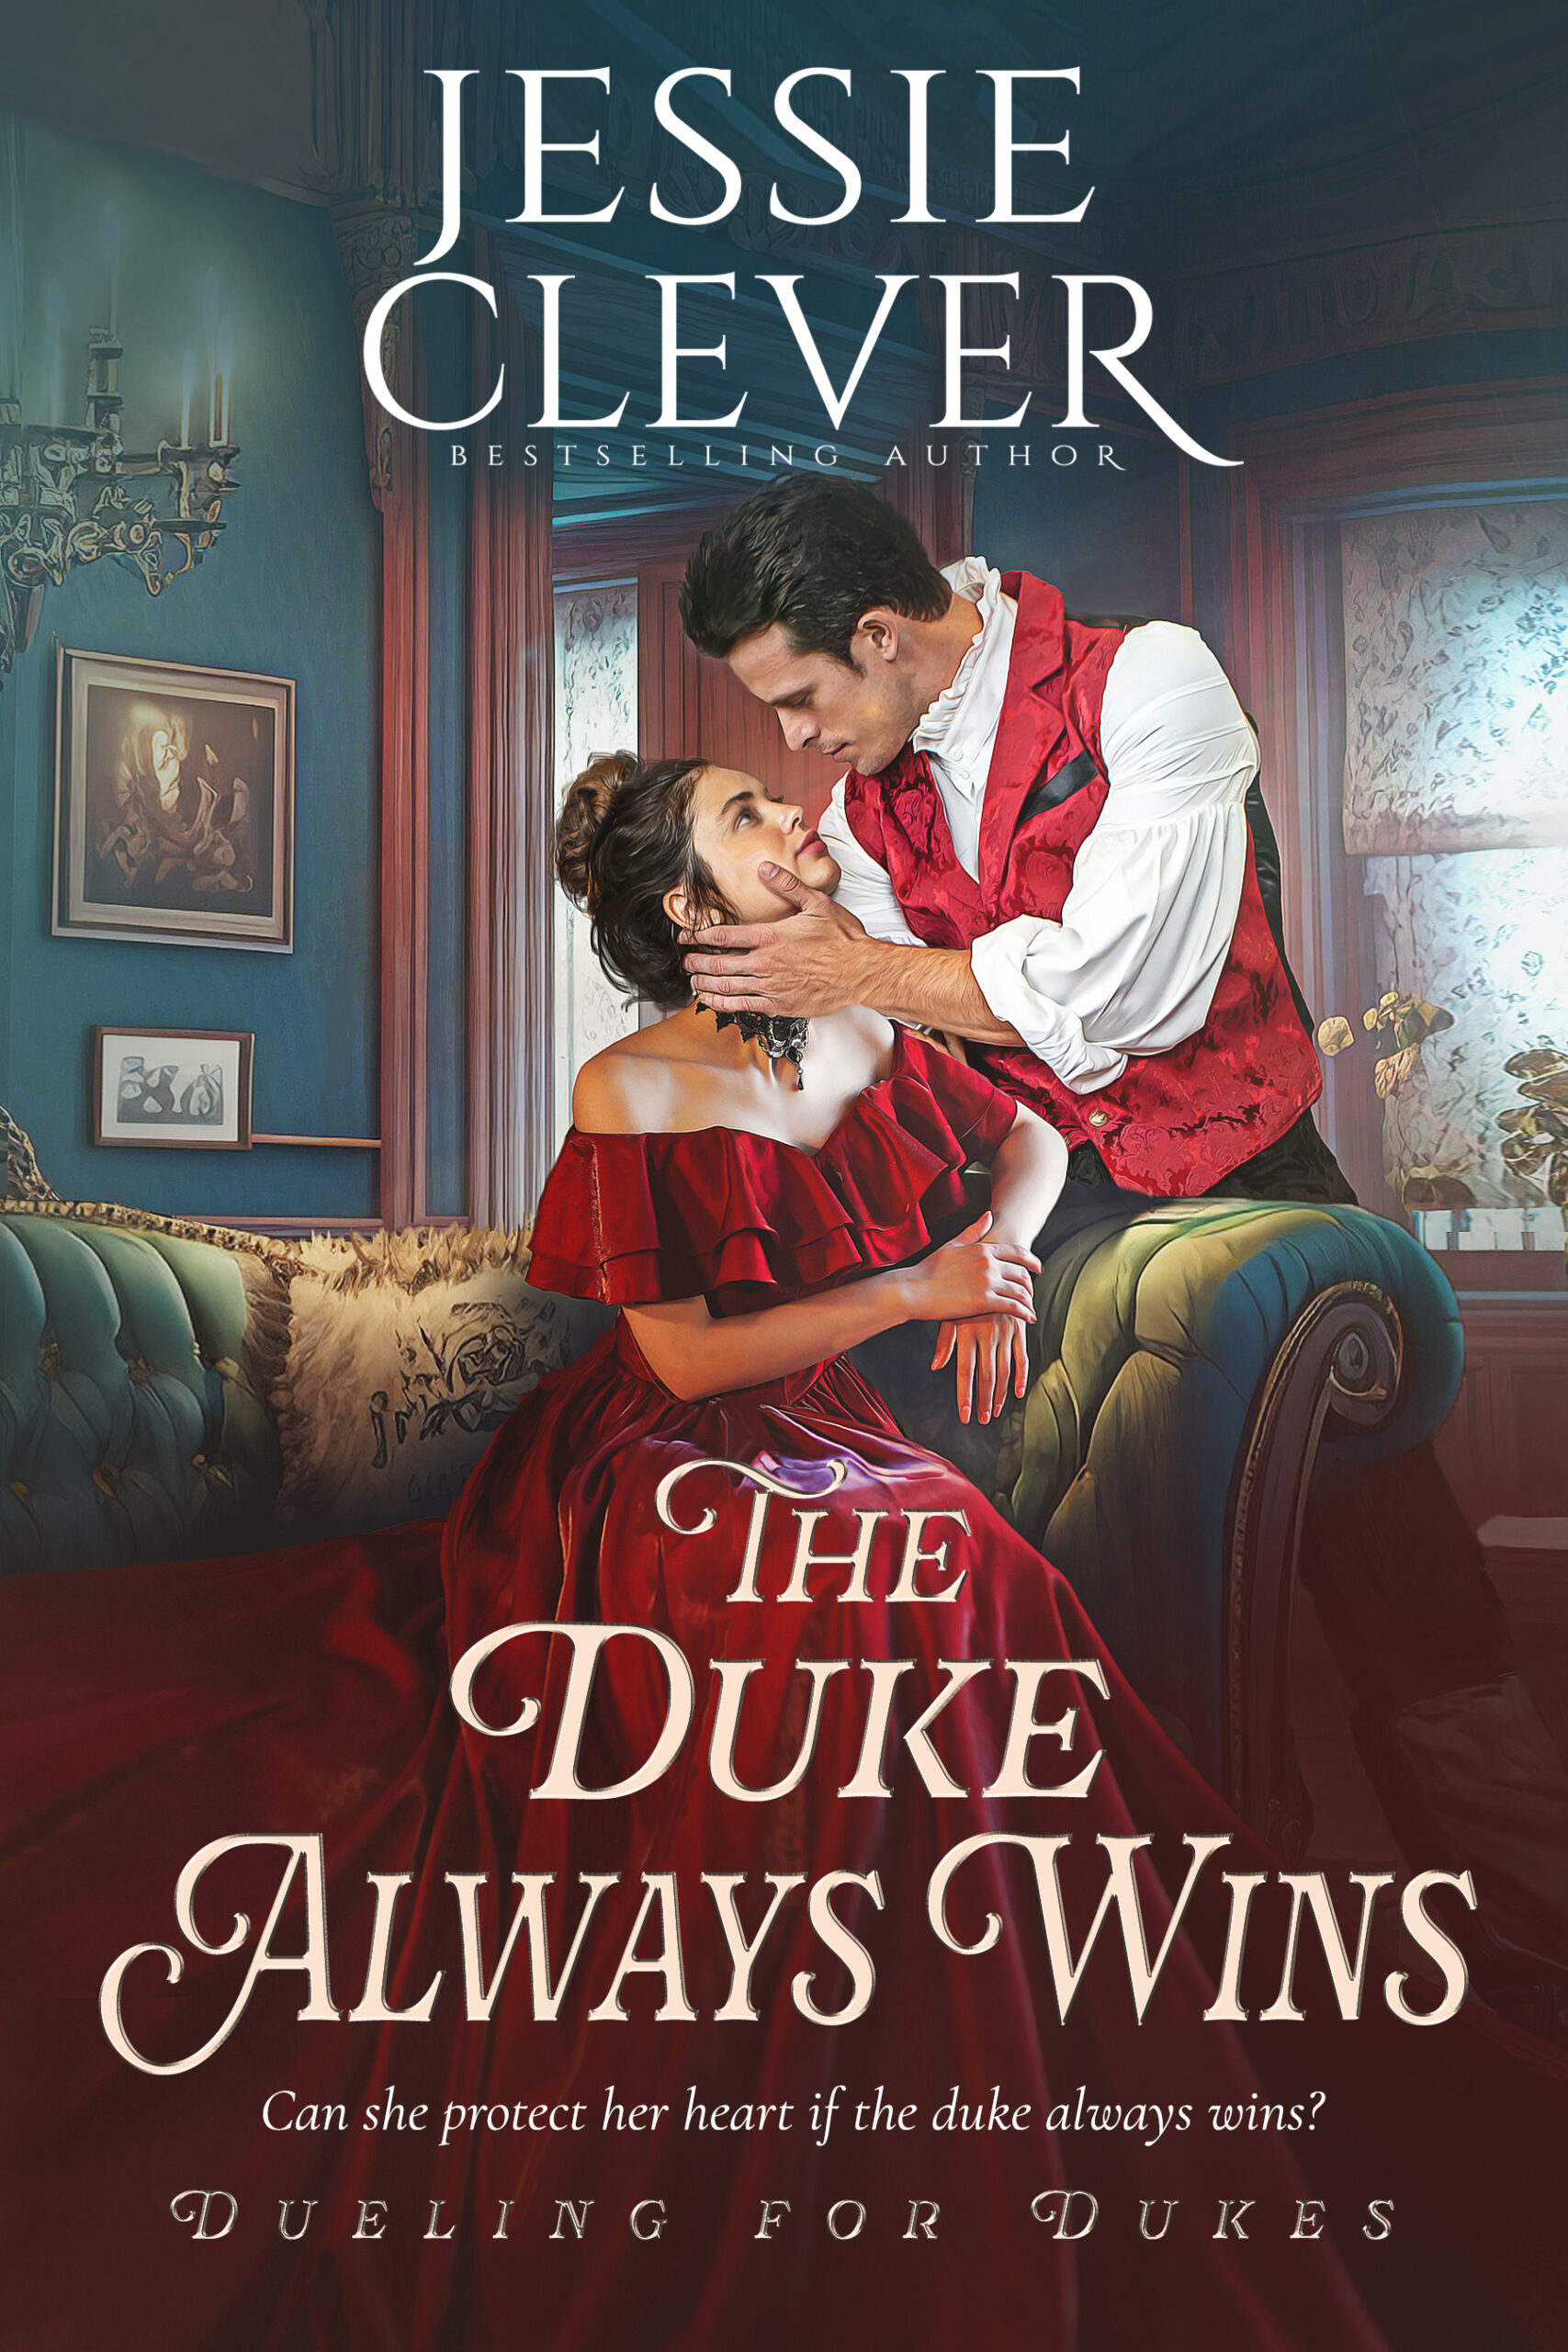 Now Available for Pre-Order: The Duke Always Wins